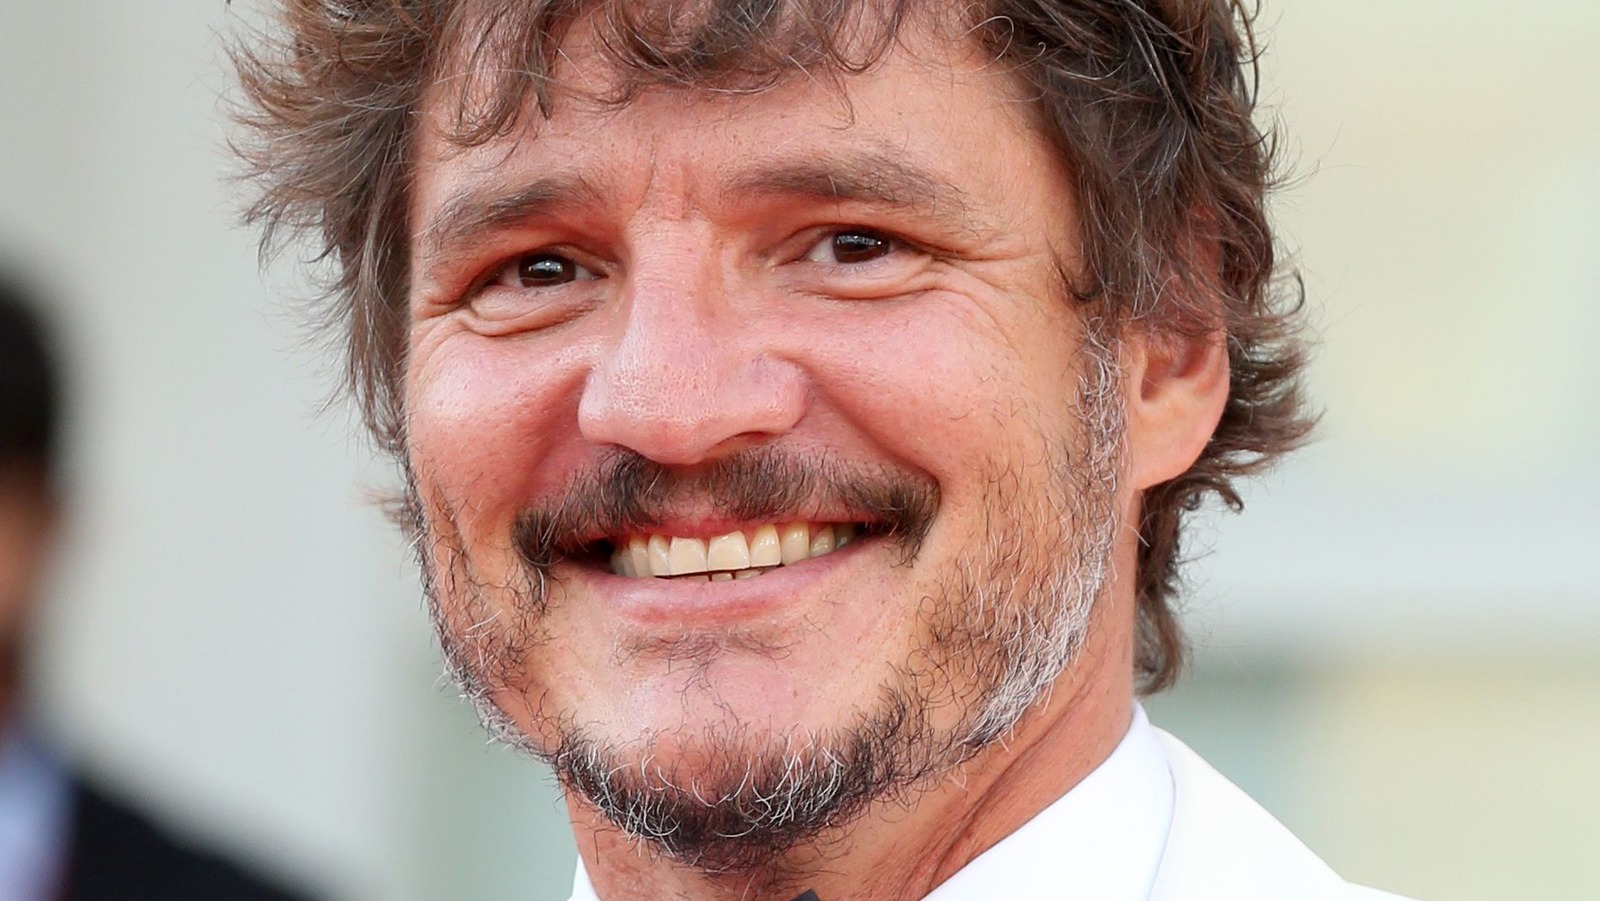 Pedro Pascal Reacts To Casting as Joel in HBO's The Last of Us